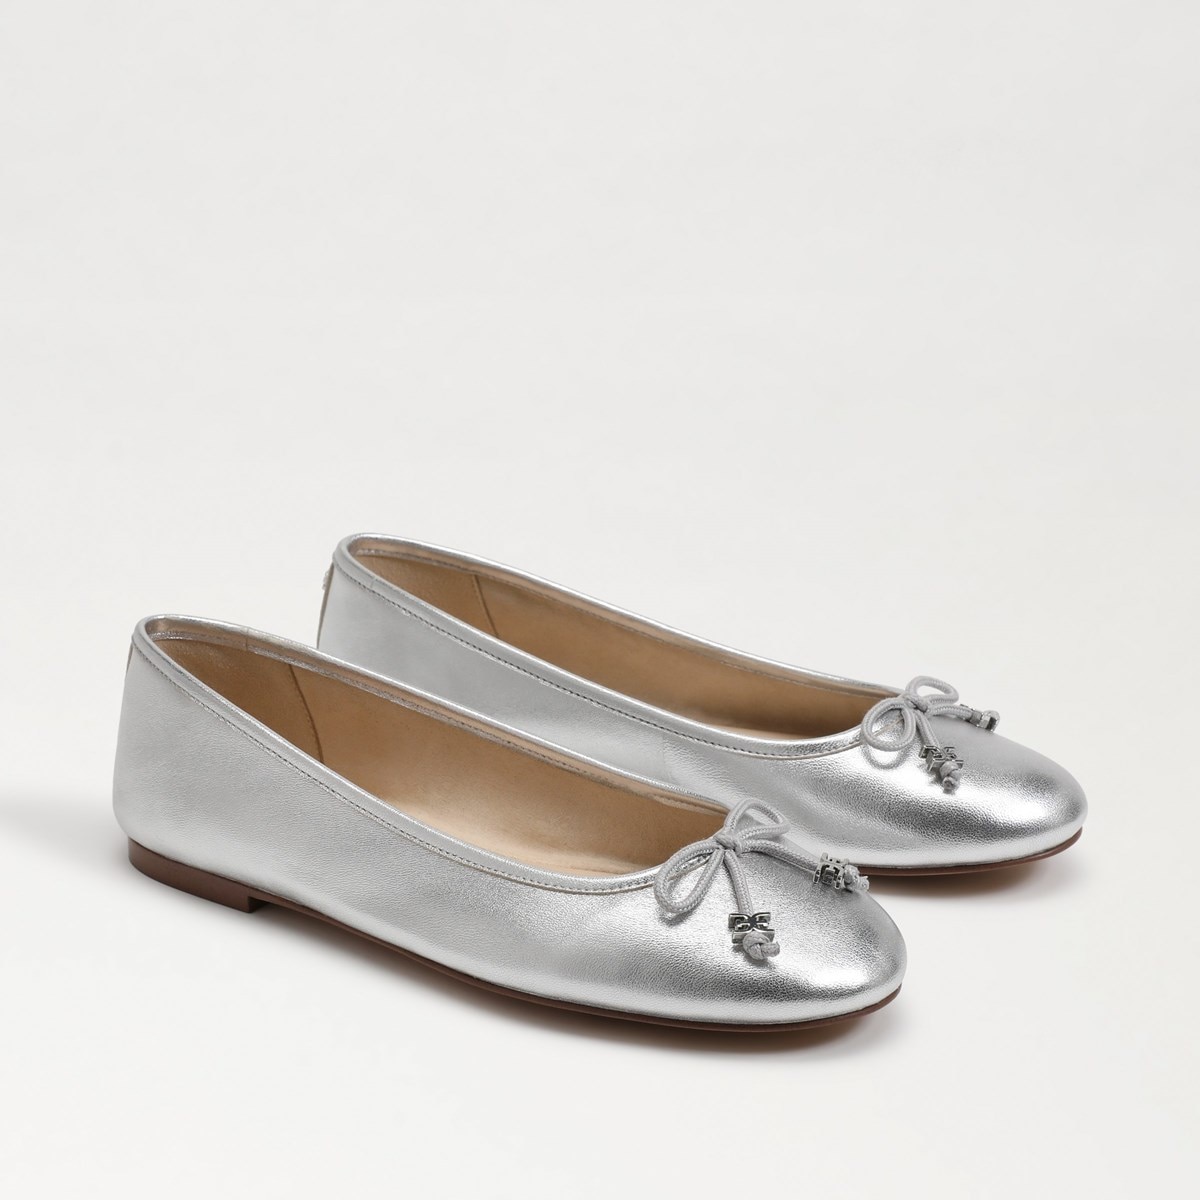 Sam Edelman Felicia Luxe Ballet Flat | Women's Flats and Loafers